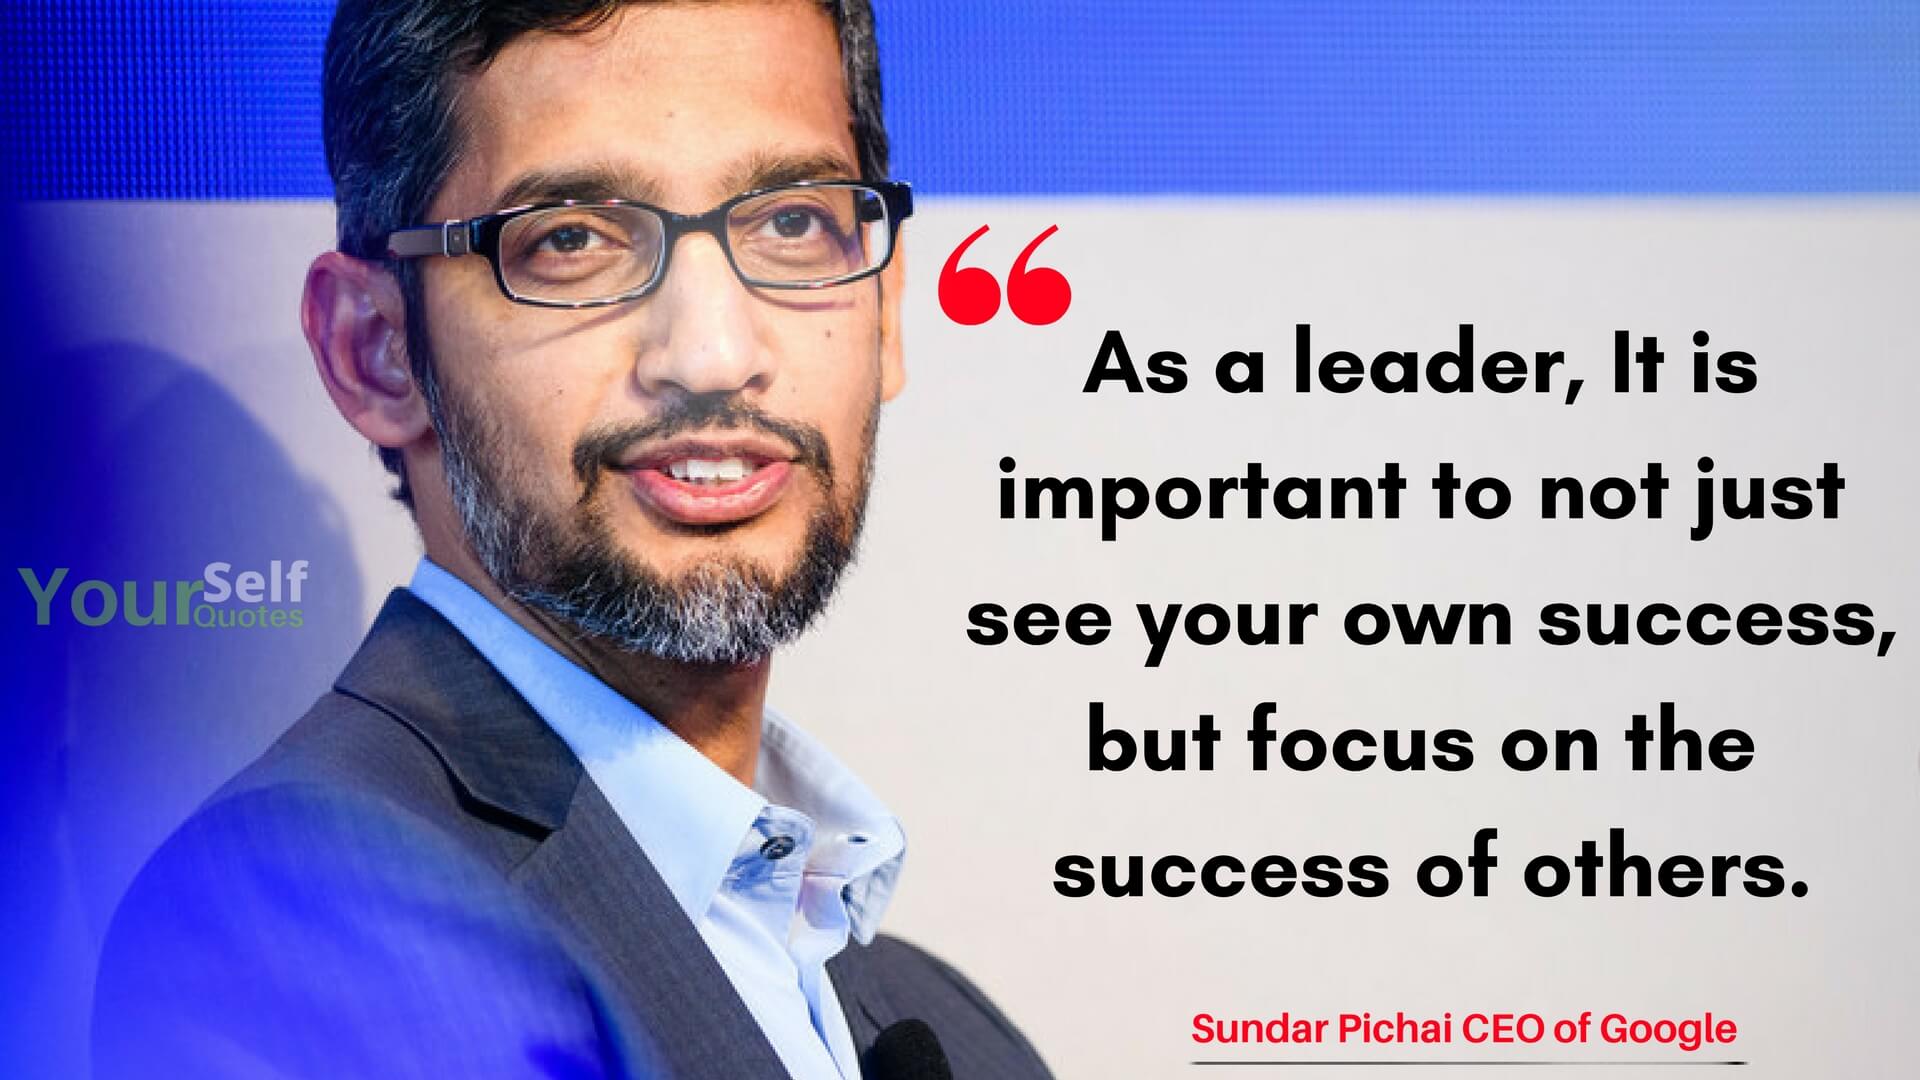 Sundar Pichai Quotes And Success Stories To Motivate You In Life